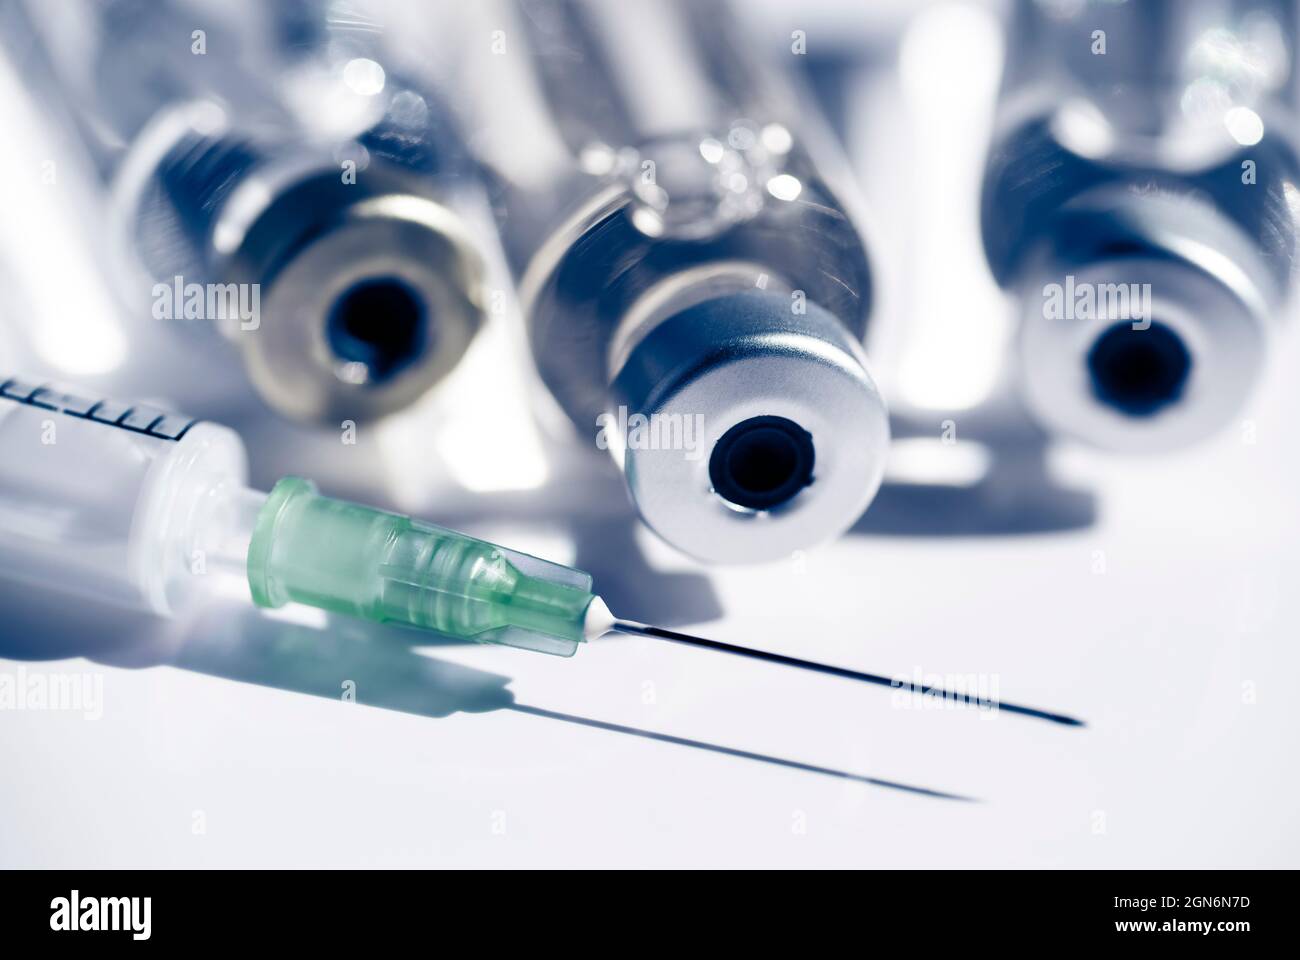 Vaccine with syringe in detail Stock Photo